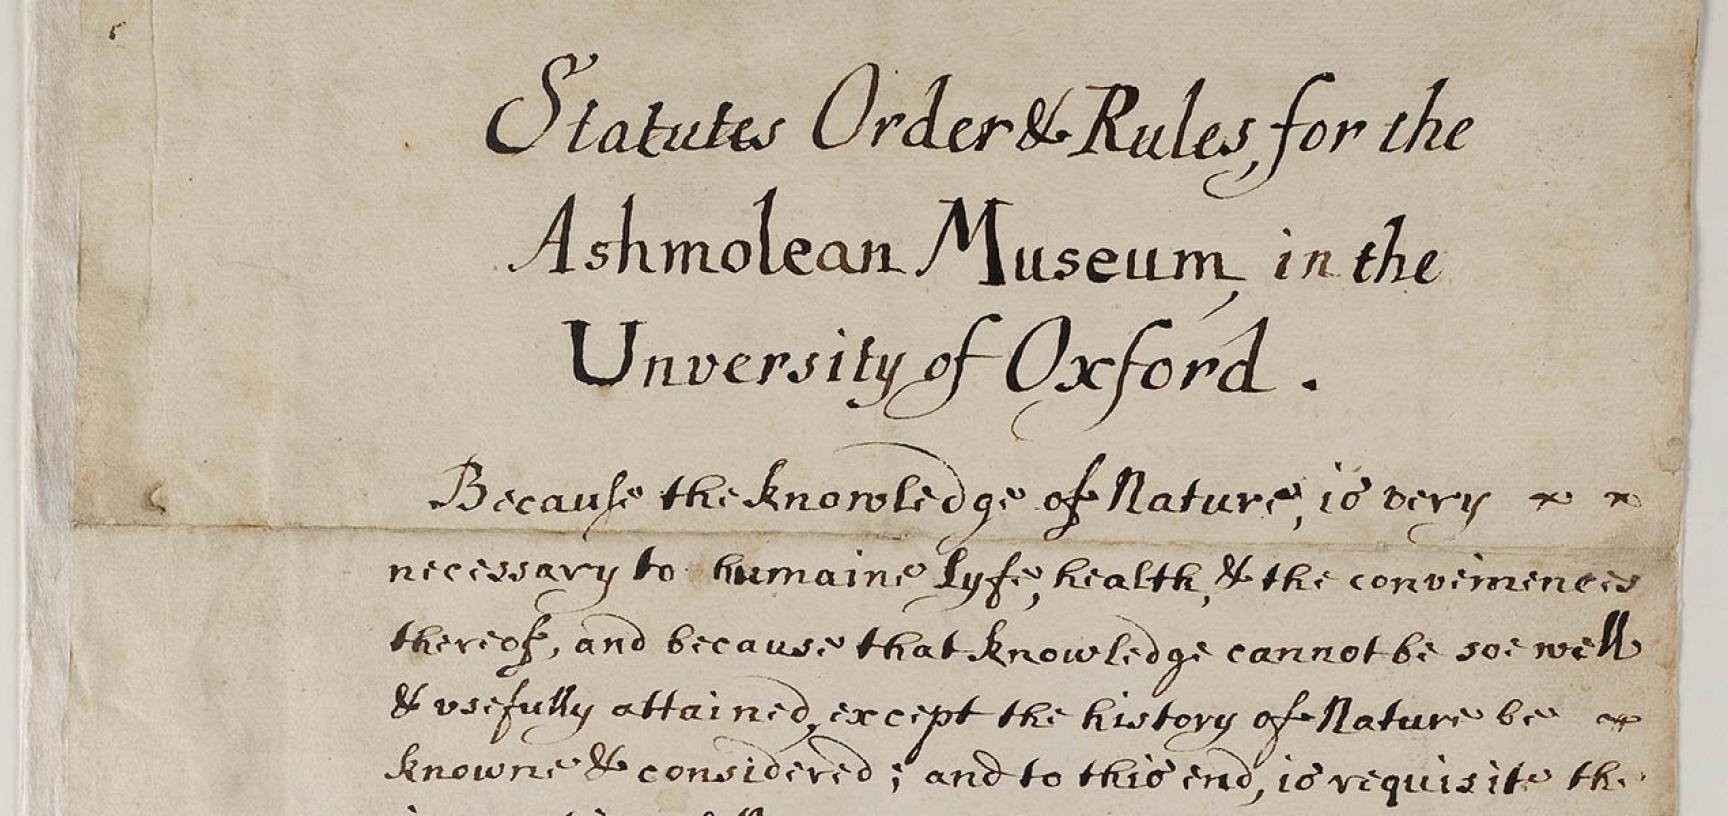 Ashmolean Museum Statutes Orders and Rules – The Ashmolean Story Gallery - Press Images